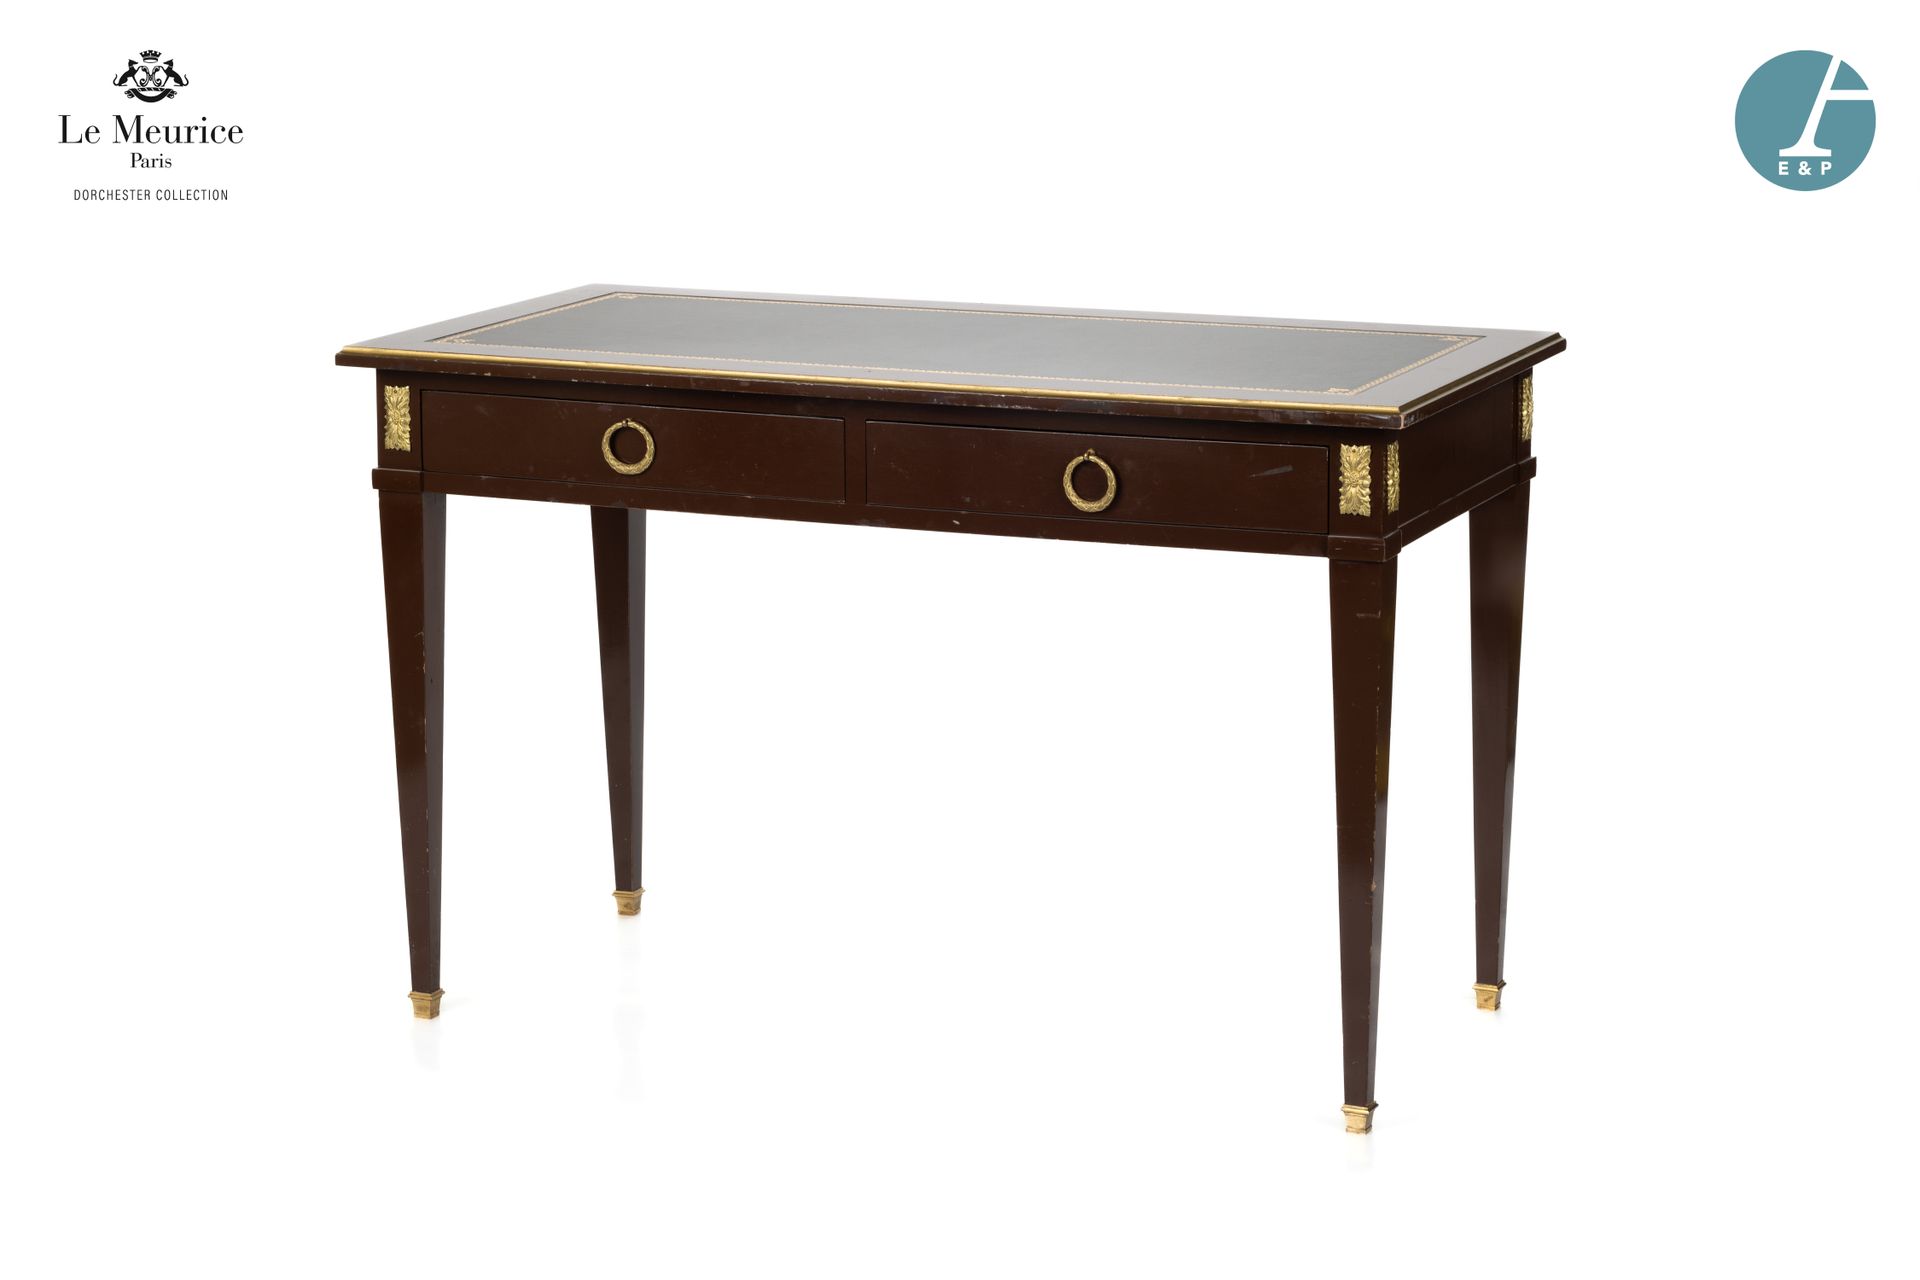 Null From Hôtel Le Meurice.
Flat desk in mahogany-stained wood, the rectangular &hellip;